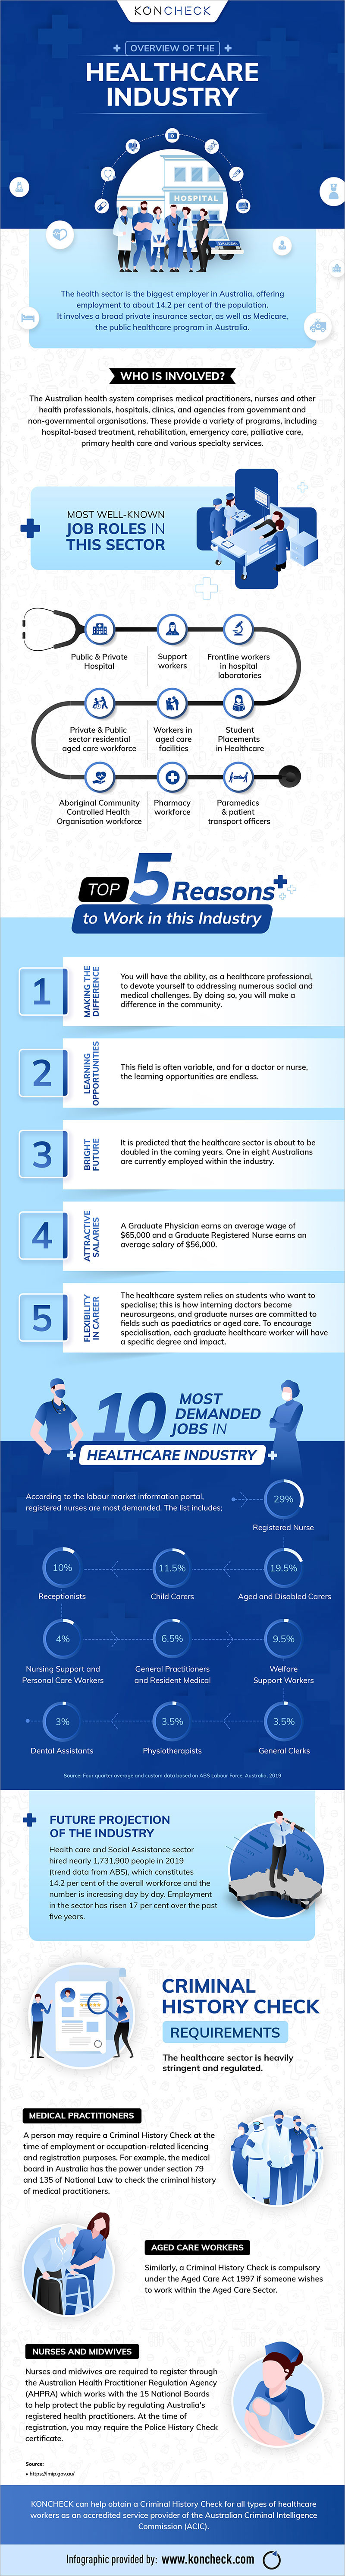 Overall Guide to the Healthcare Industry in Australia